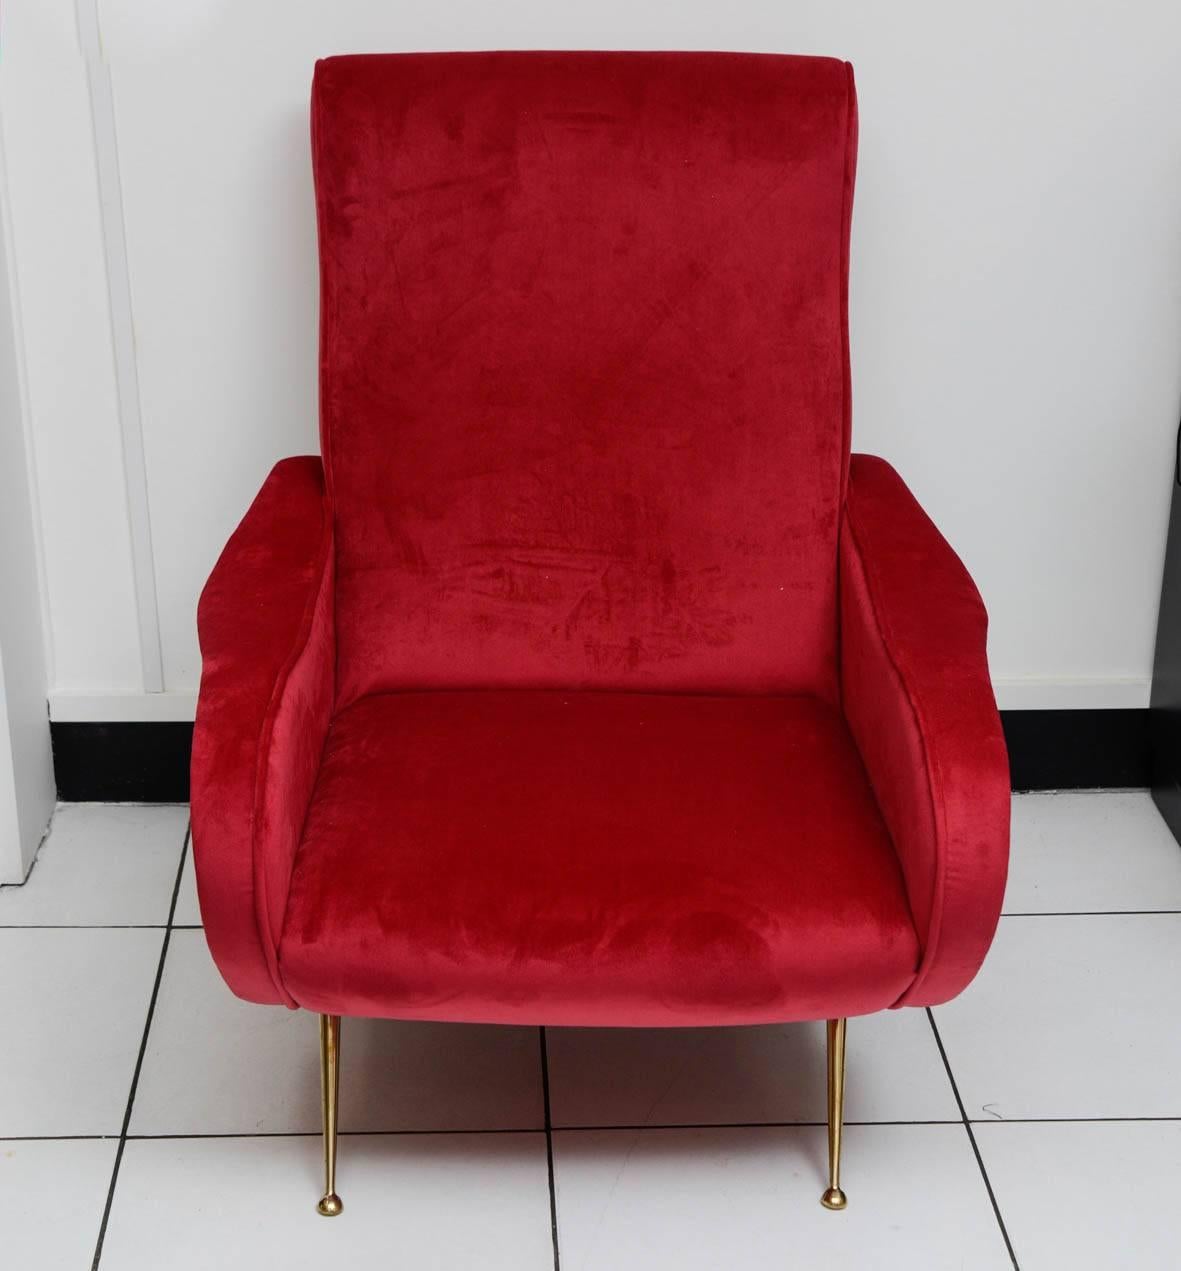 Italian armchairs reupholstered red velvet in excellent condition.